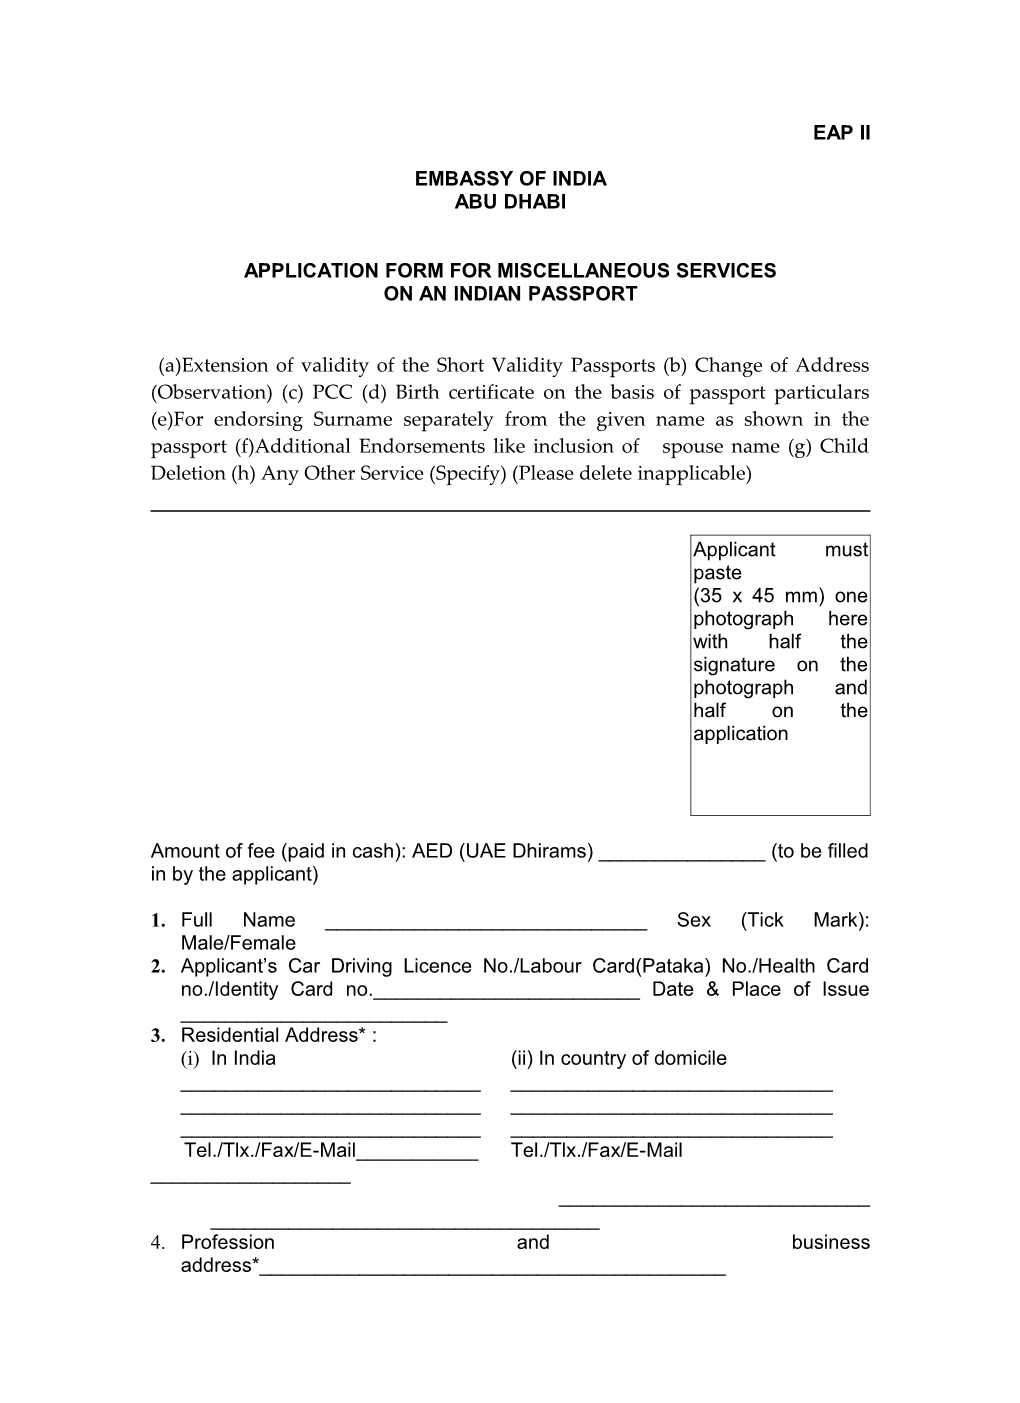 Application Form for Miscellaneous Services